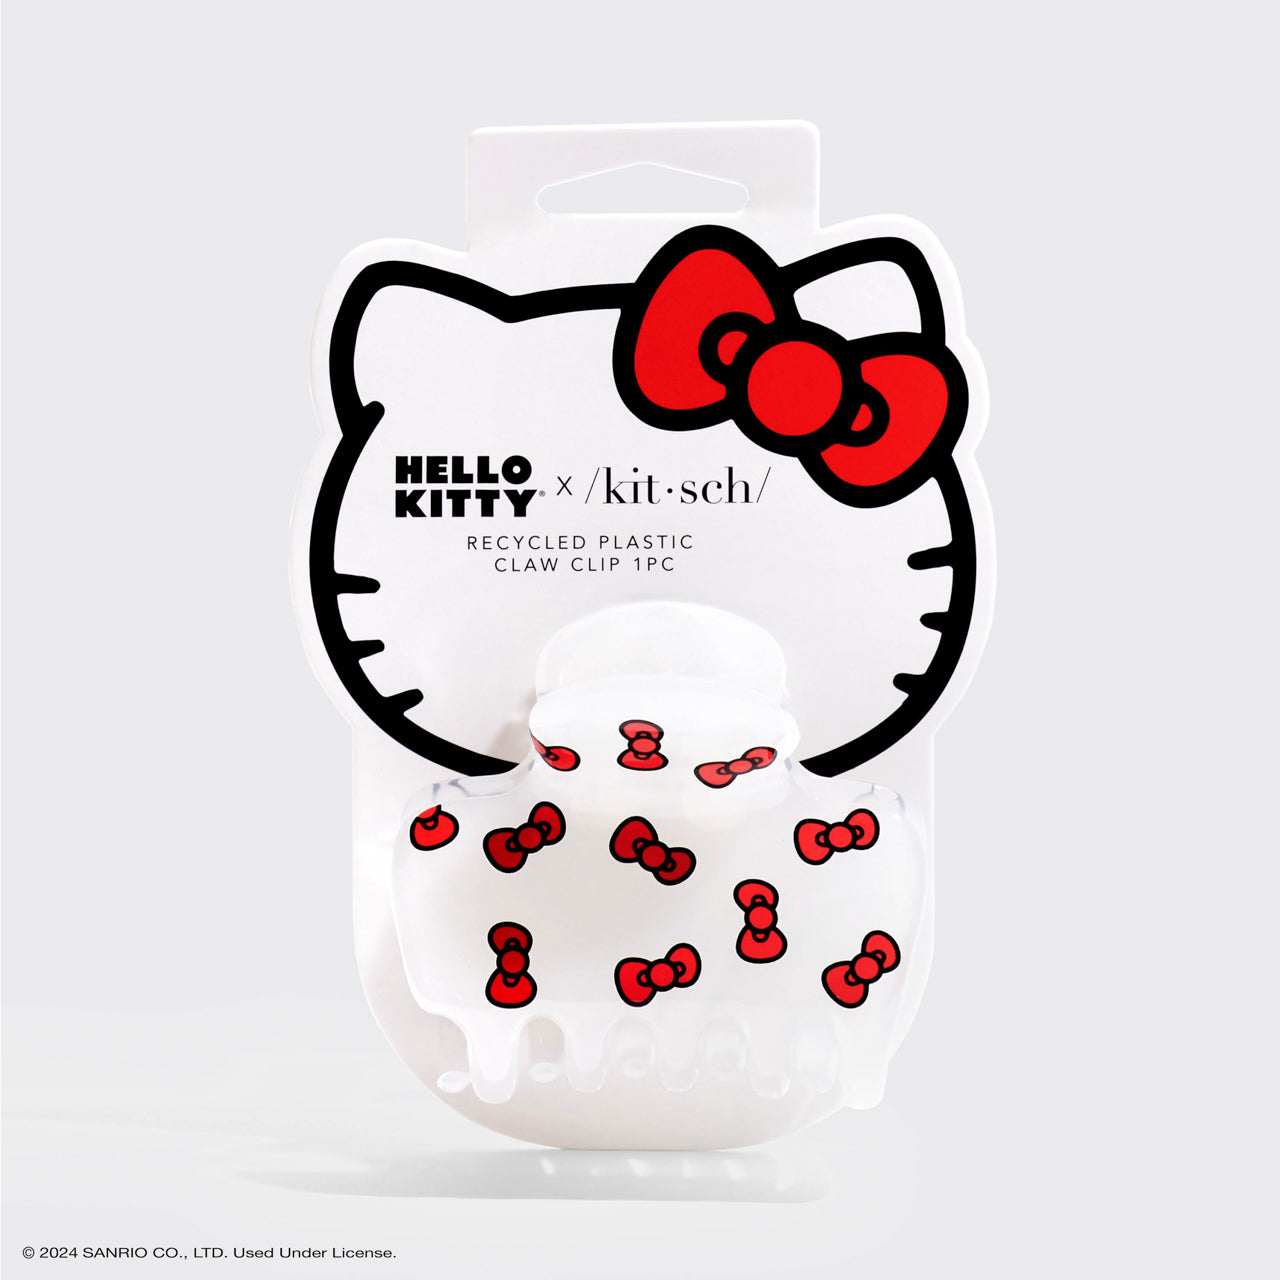 Hello Kitty x Kitsch plastique recyclé pince à griffes 1pc - Kitty Bows